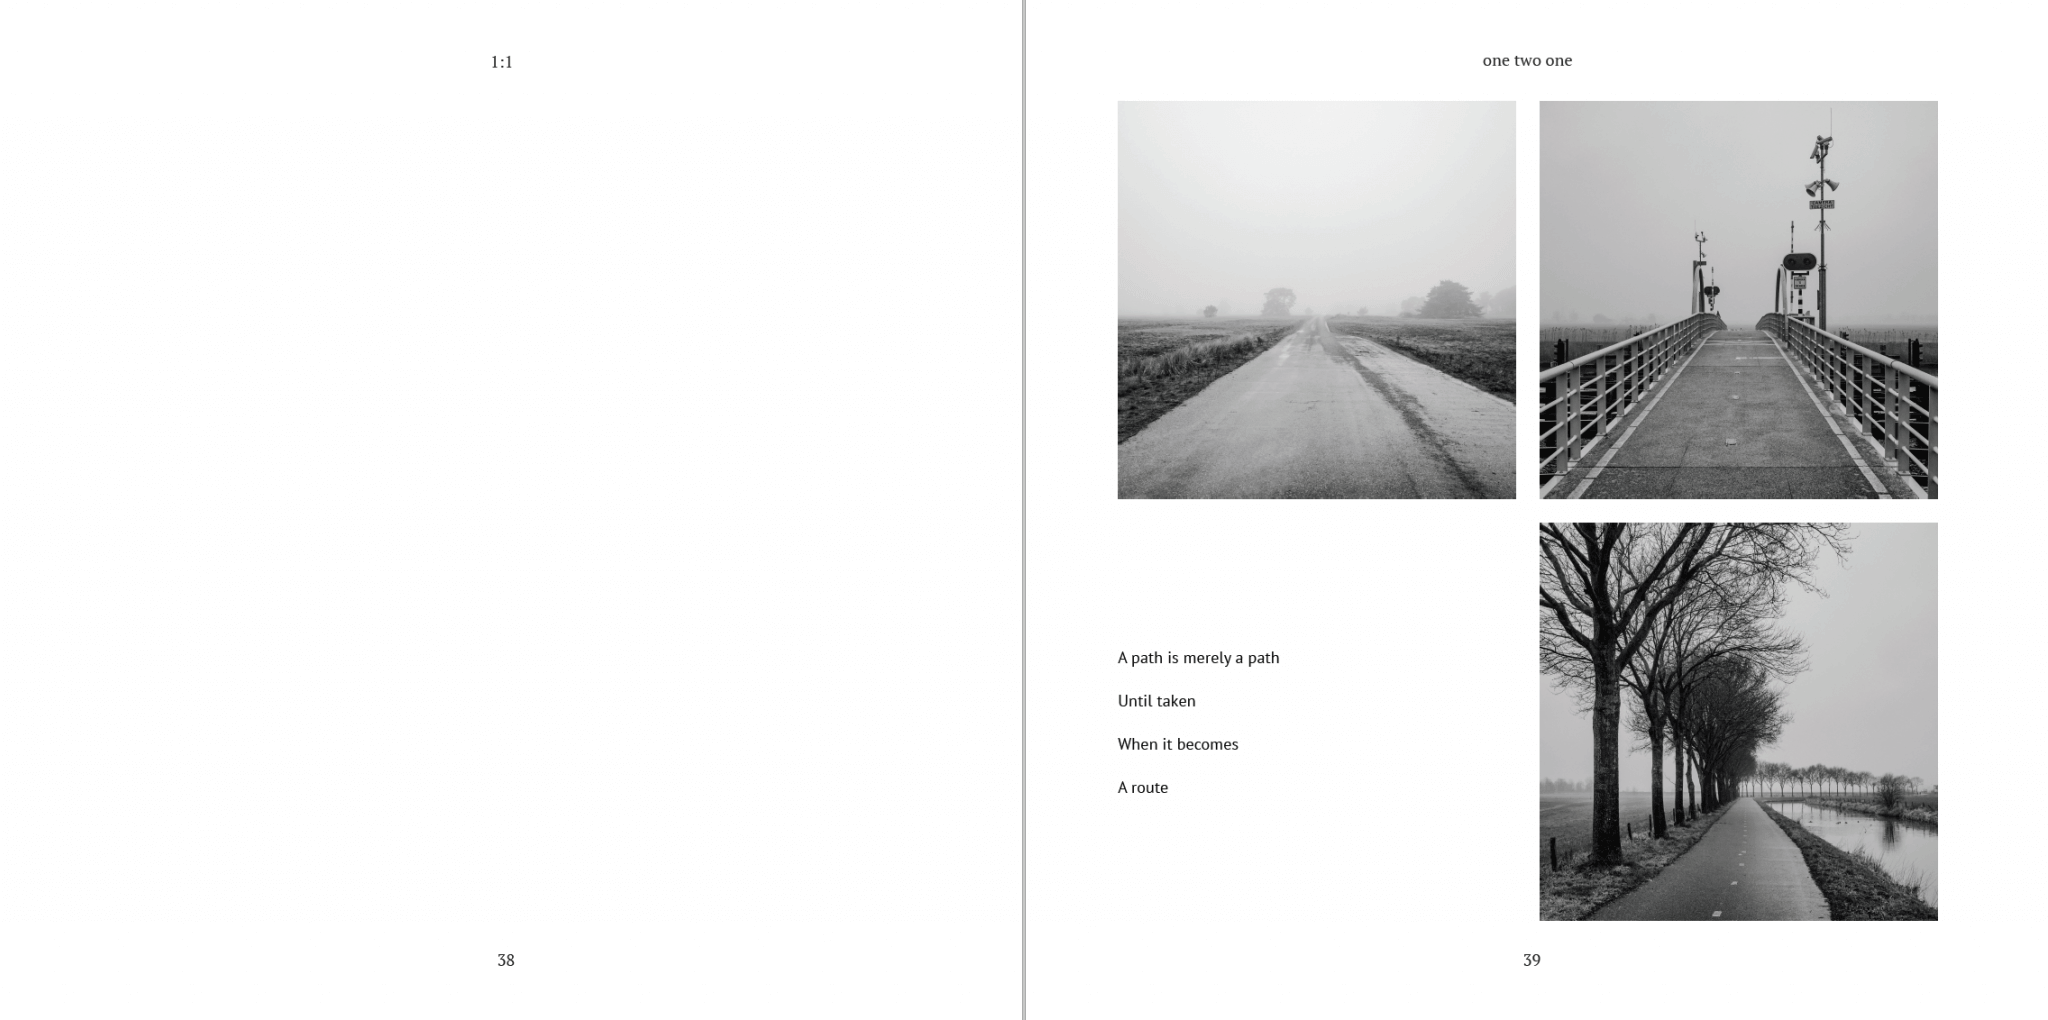 Mitchel Lensink de lens photography project one two one book